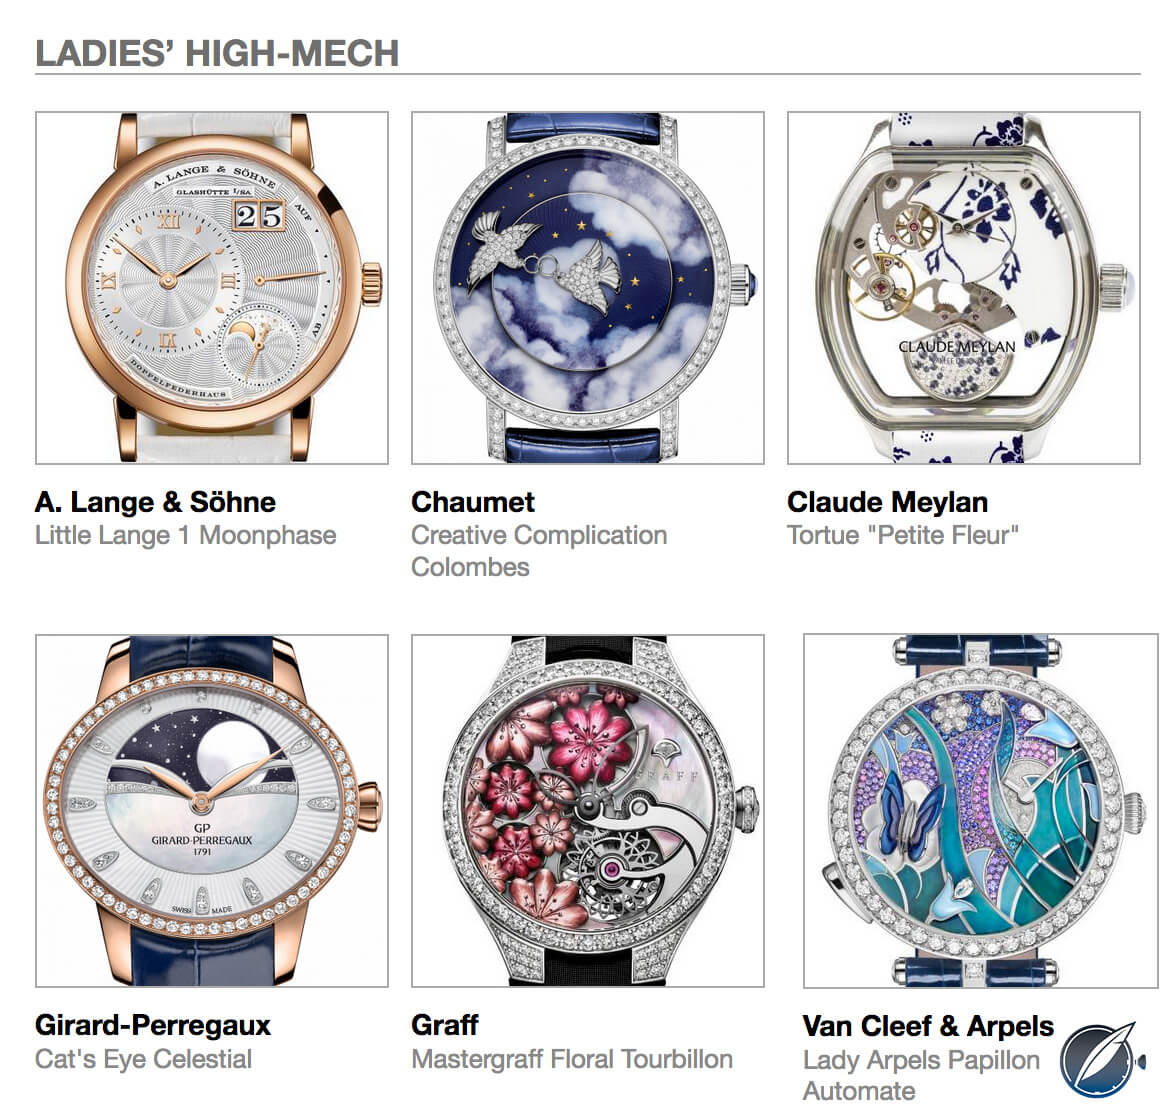 Pre-selected Ladies High-Mech watches for the 2017 GPHG are, clockwise from top left above: A. Lange & Söhne Little Lange 1 Moonphase, Chaumet Creative Complication Colombes, Claude Meylan Tortue Petite Fleur, Girard-Perregaux Cat’s Eye Celestial, Graff Mastergraff Floral Tourbillon, and Van Cleef & Arpels Lady Arpels Papillon Automate